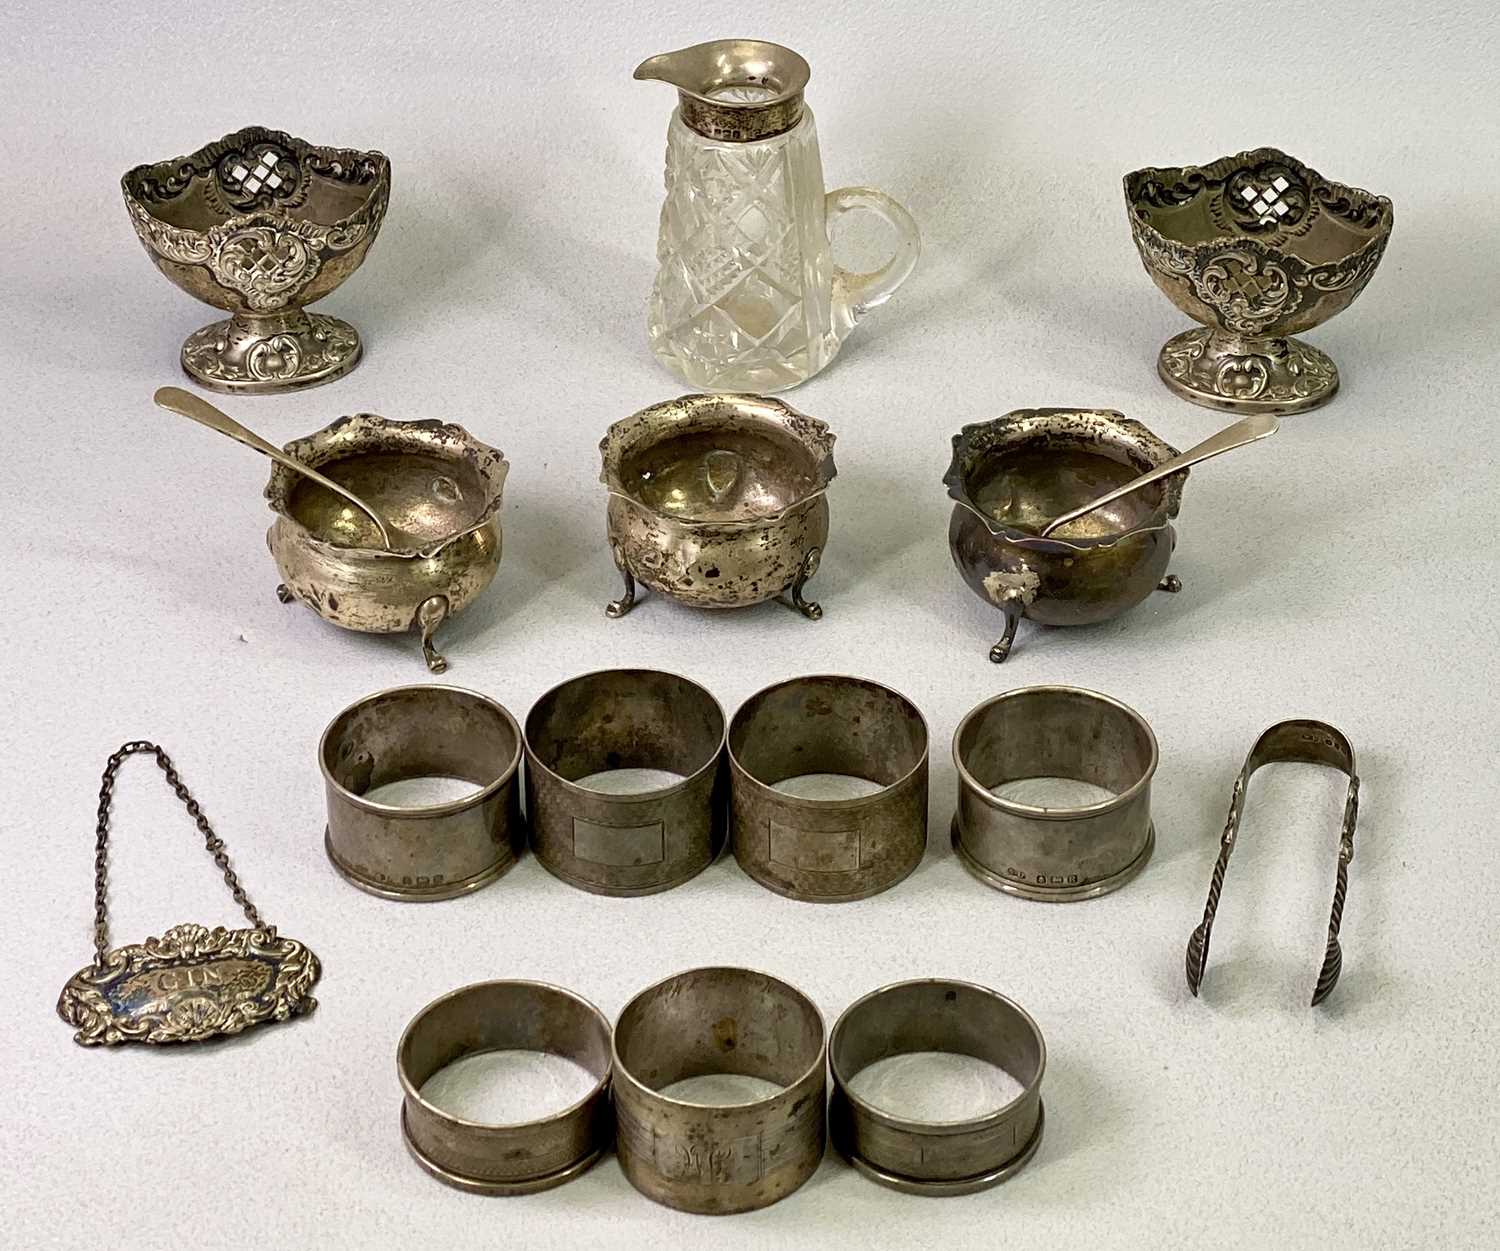 SMALL SILVER - 17 items, all having Birmingham hallmarks, various dates and makers to include 7 x